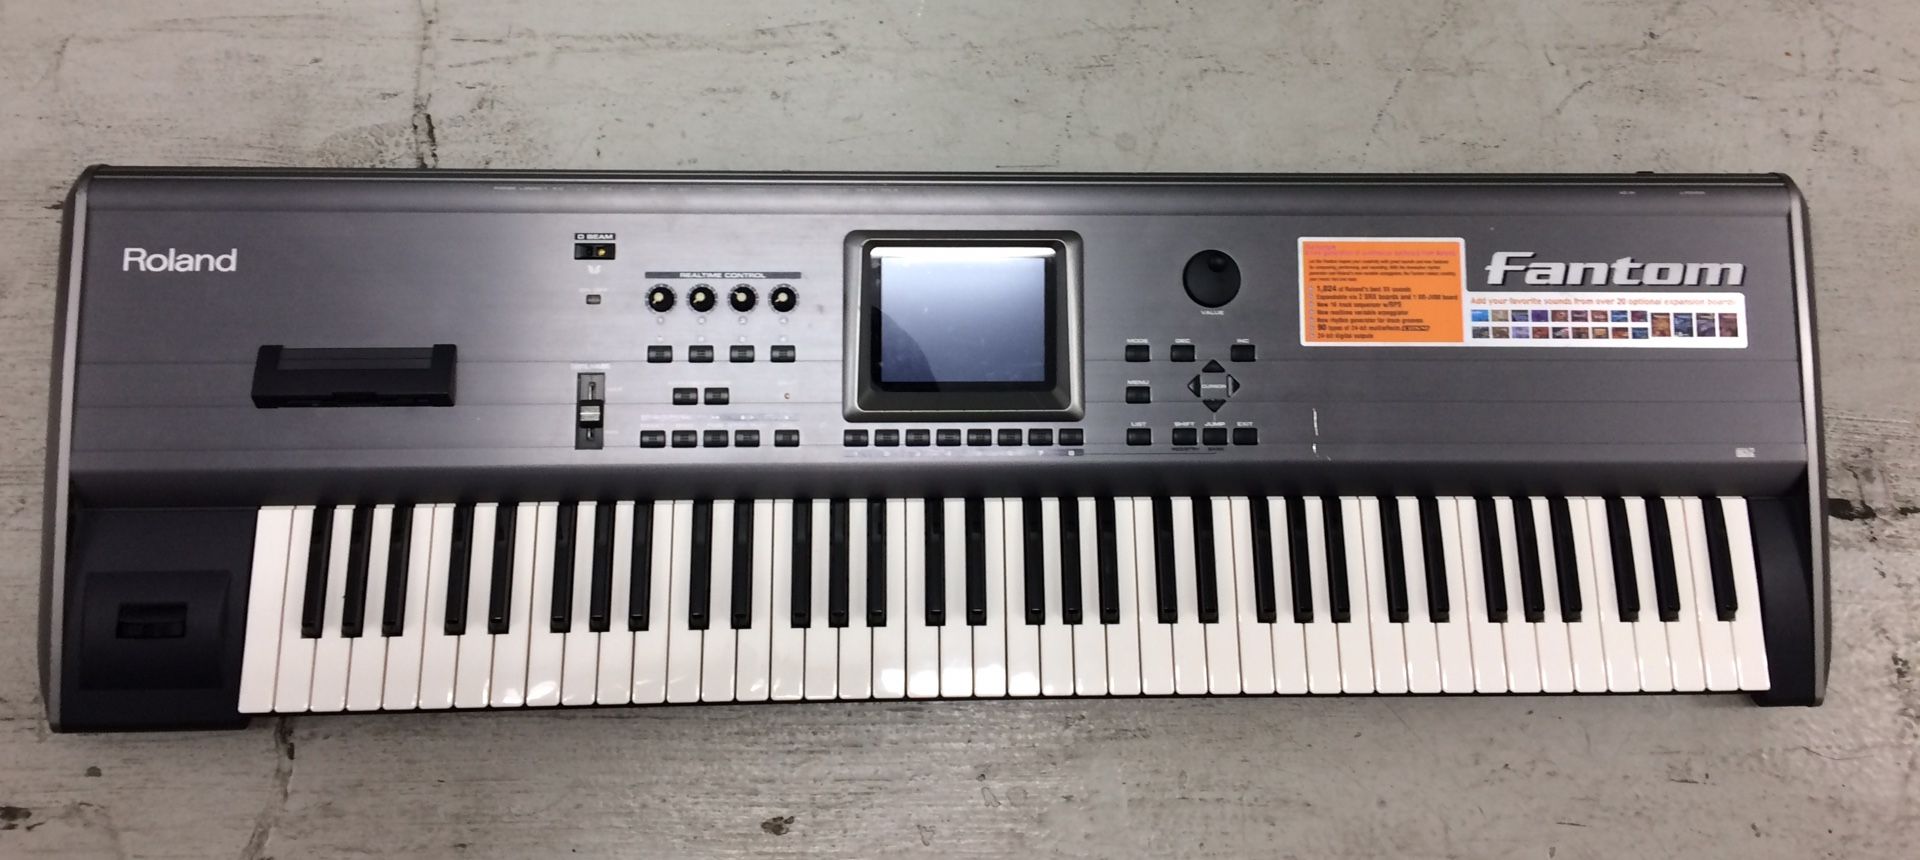 Roland Fantom keyboard. Make your own music on this keyboard. $1000 OBO please no low balling...